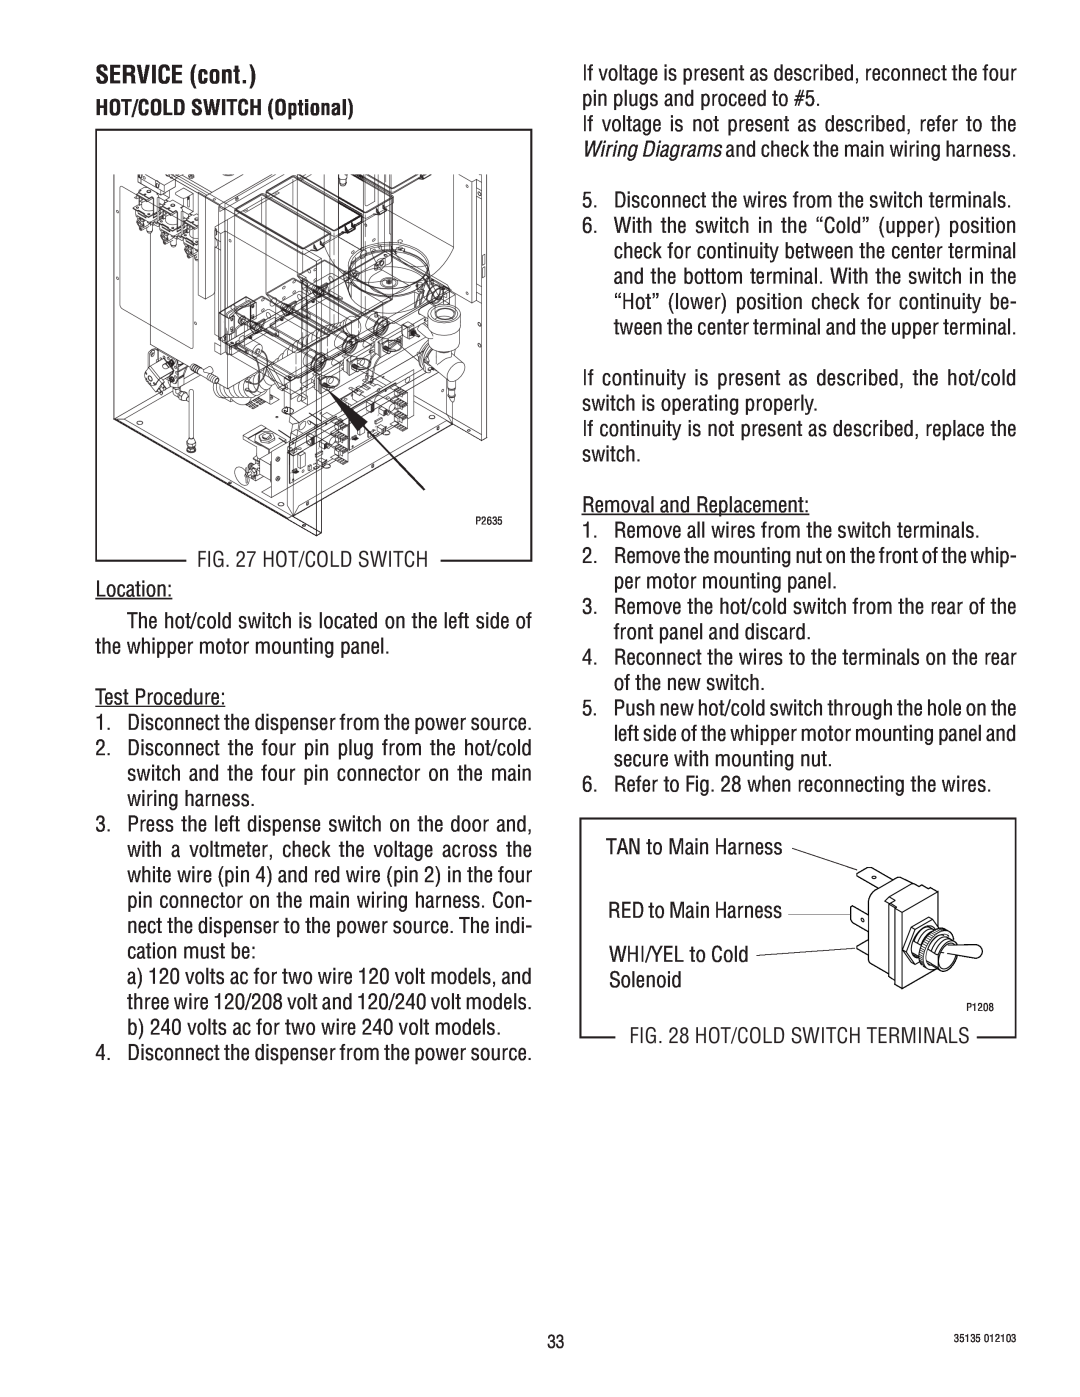 Bunn FMD-4, FMD-5 service manual HOT/COLD SWITCH Optional, SERVICE cont 